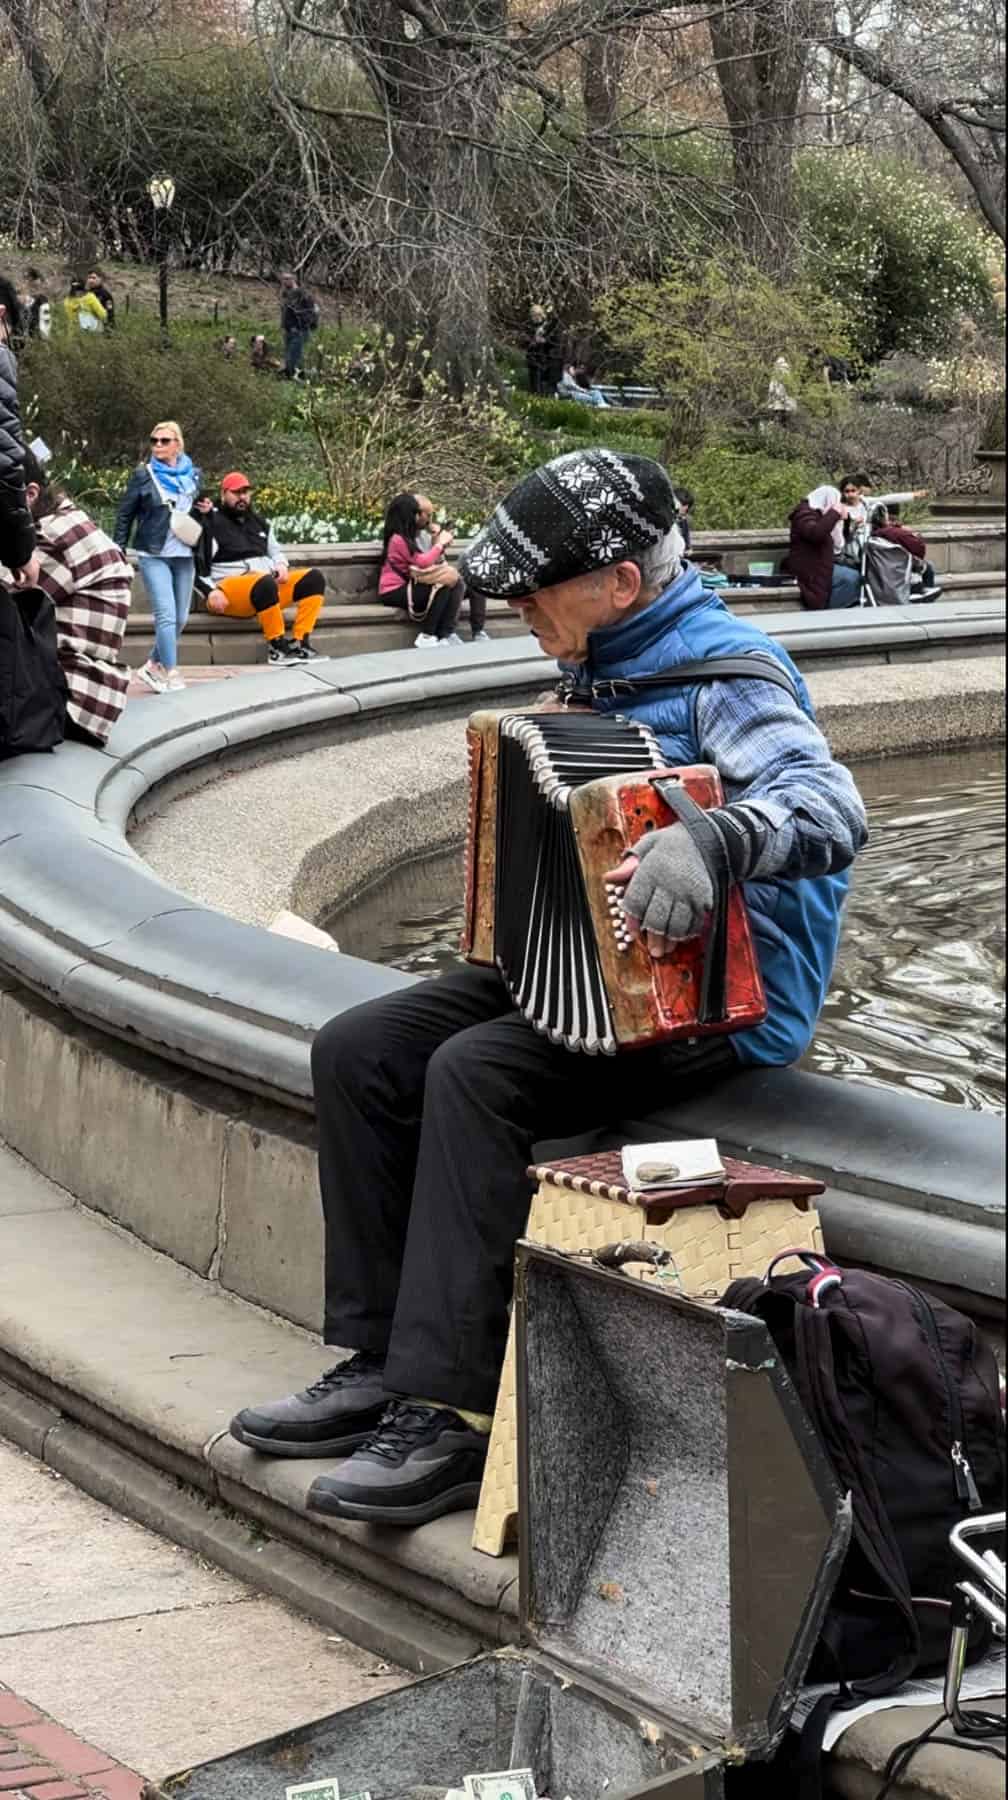 A man playing the accordion at Bethesda Fountain in Central Park.